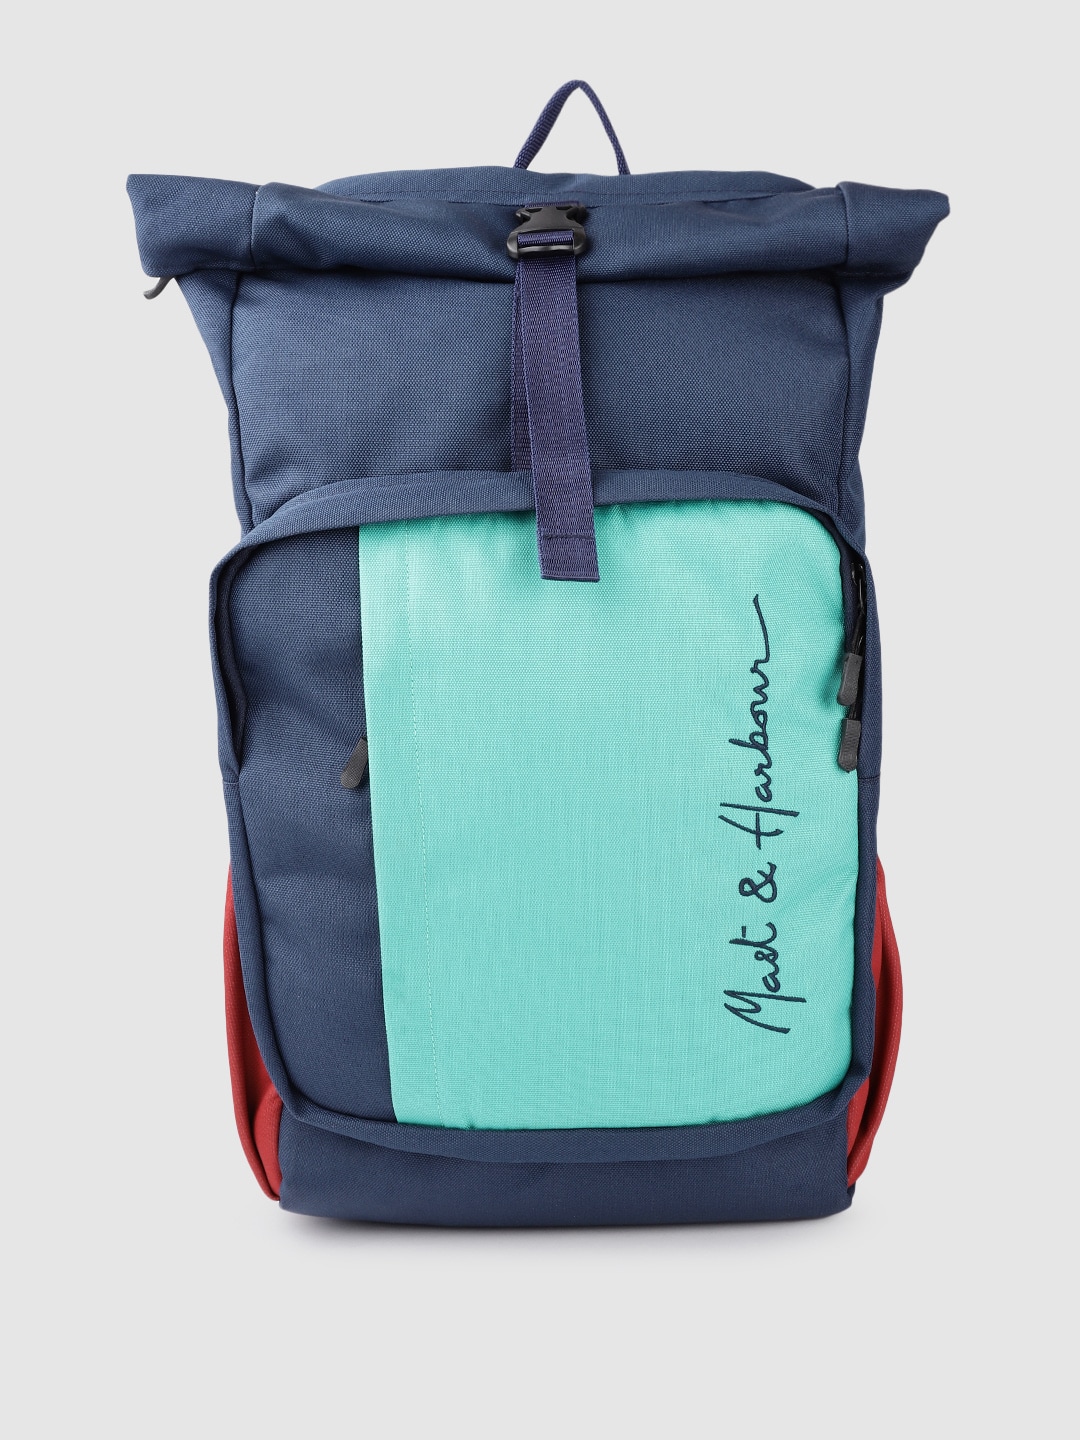 Mast & Harbour Unisex Navy Blue & Sea Green Colourblocked Embroidered Backpack 14.7 L Price in India